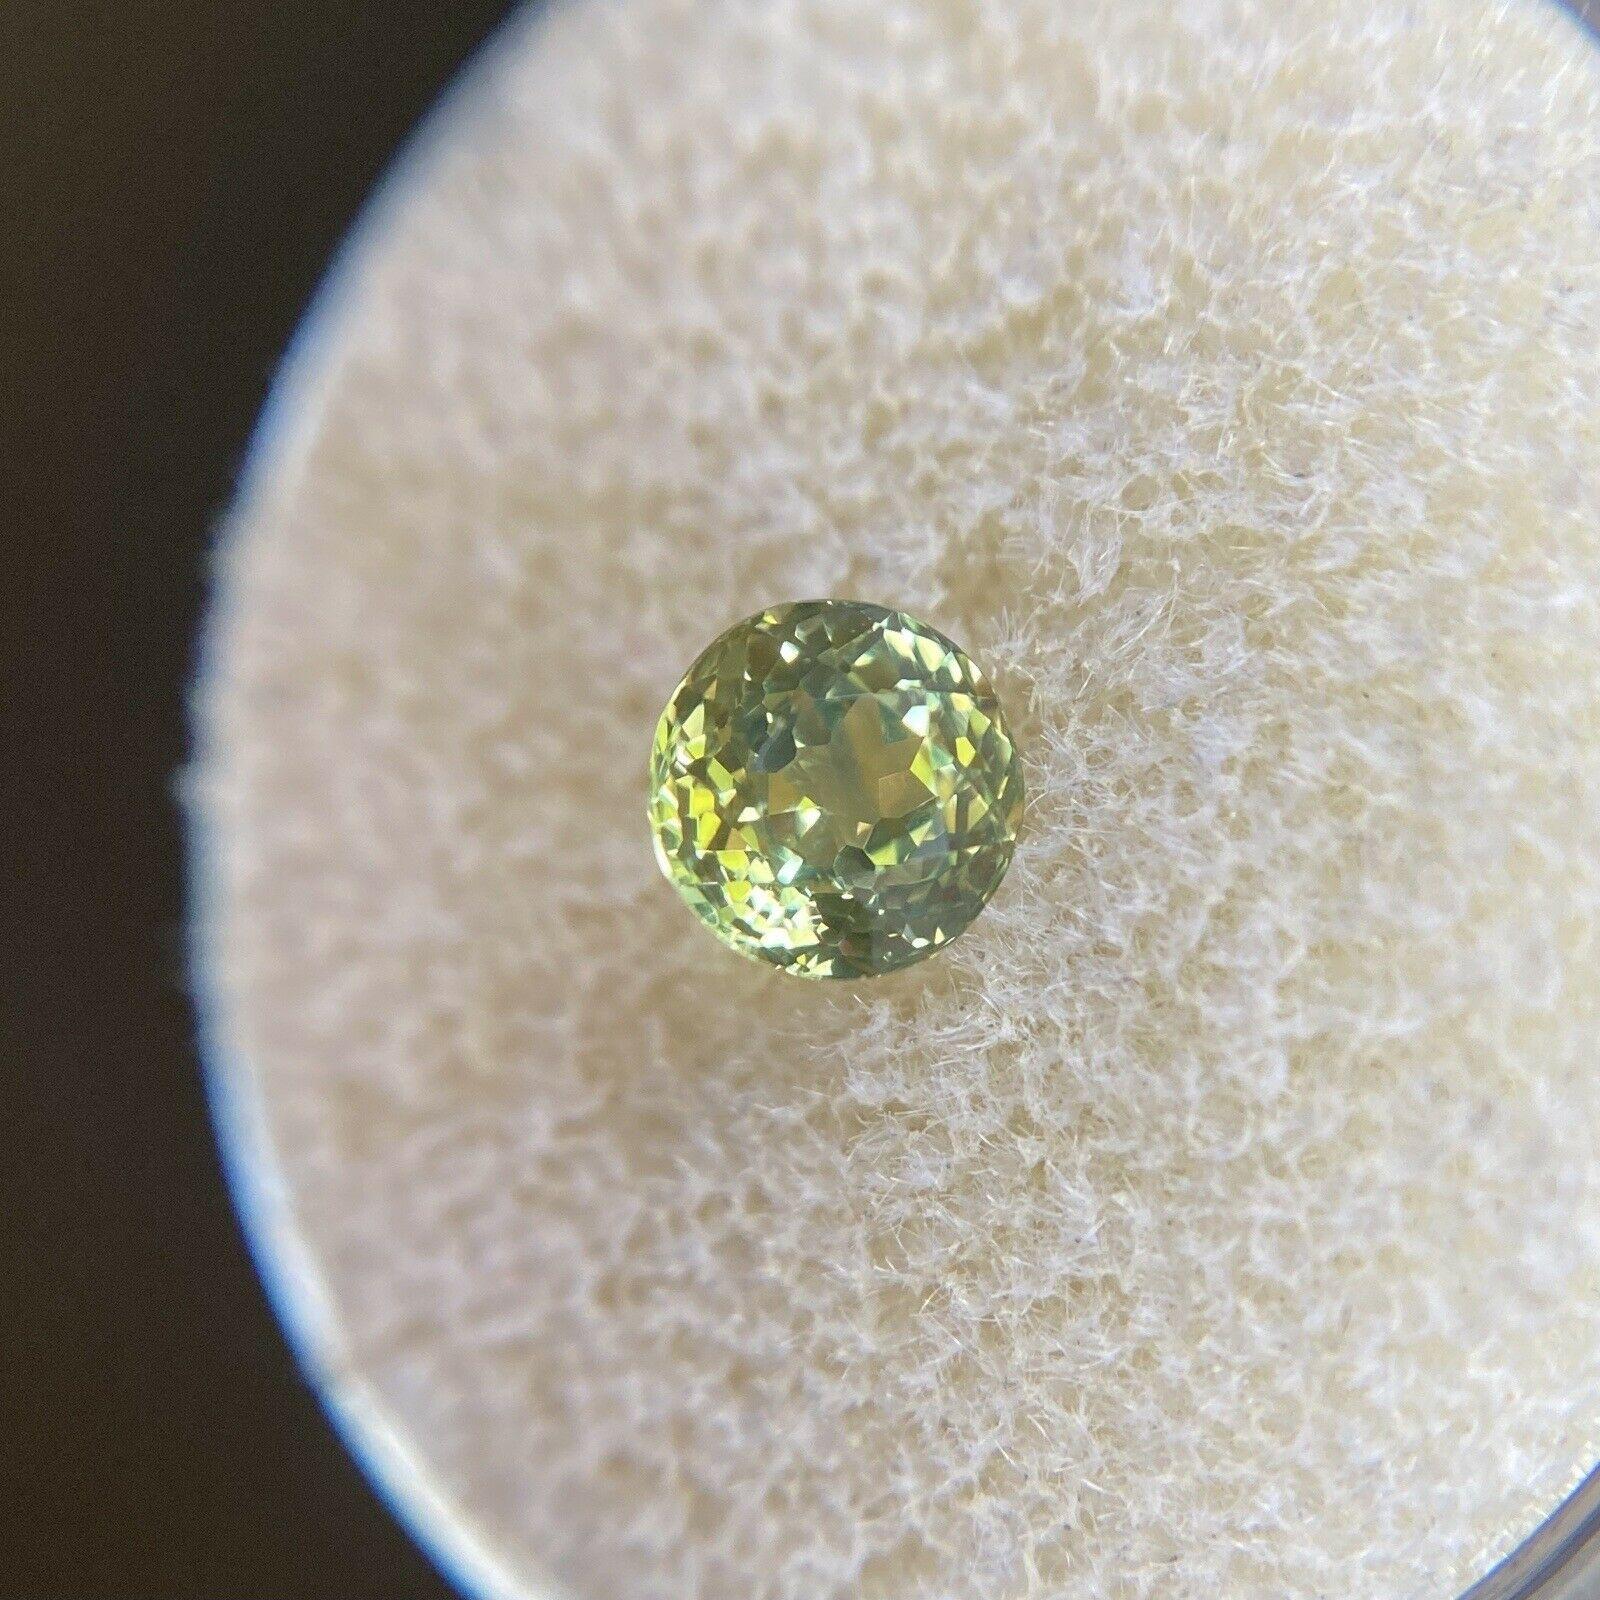 Rare Australian Untreated Green Yellow Bi Colour Sapphire 0.98ct Round Cut 5.4mm

Rare Greenish Yellowish Blue Parti Colour Australian Sapphire Gemstone. 
0.98 Carat with a beautiful and unique green yellow colour. Very rare and stunning to see.